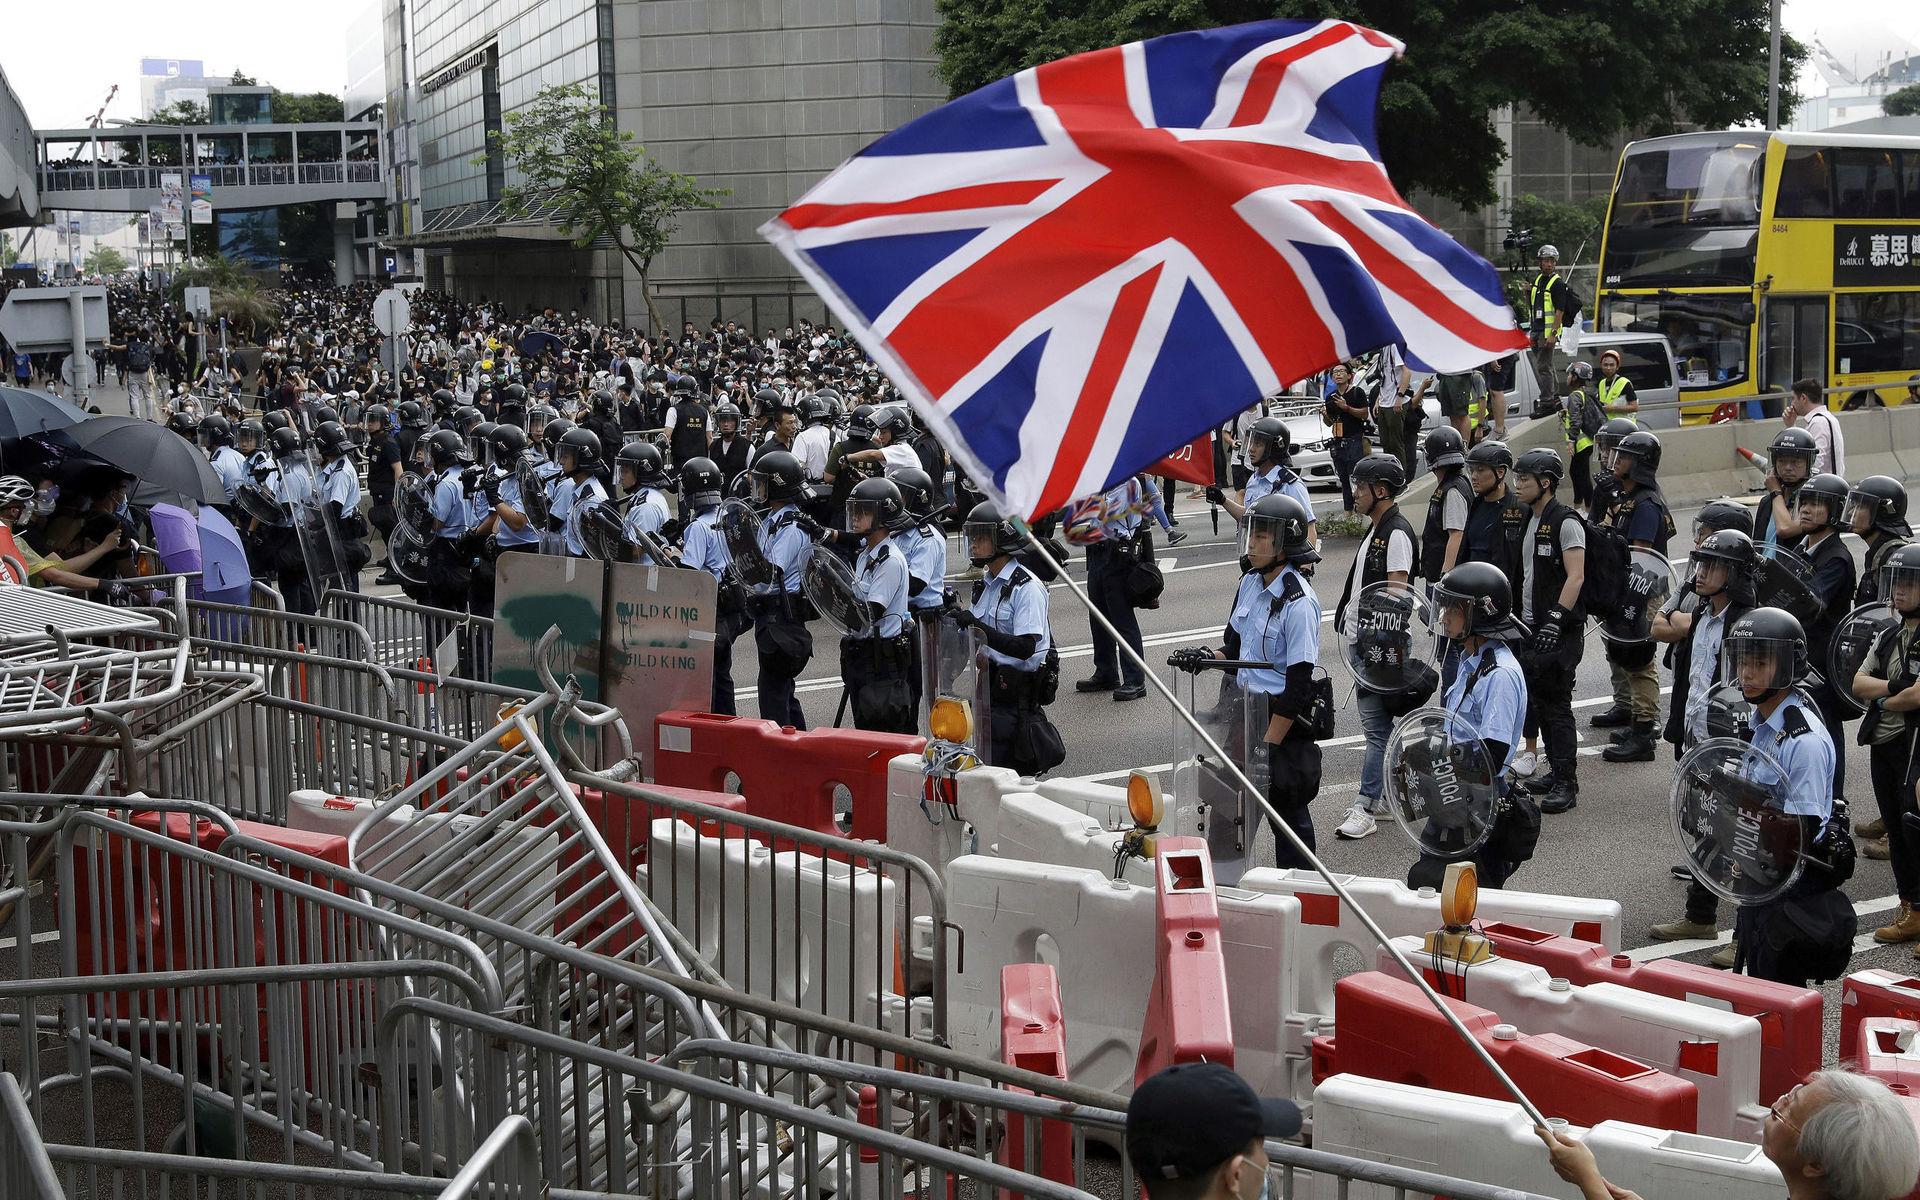 A man waves a British flag as policemen in anti-riot gear stand guard against the protesters on a closed-off road near the Legislative Council in Hong Kong, Wednesday, June 12, 2019. Hundreds of protesters surrounded government headquarters in Hong Kong on Wednesday as the administration prepared to open debate on a highly controversial extradition law that would allow accused people to be sent to China for trial. (AP Photo/Vincent Yu)